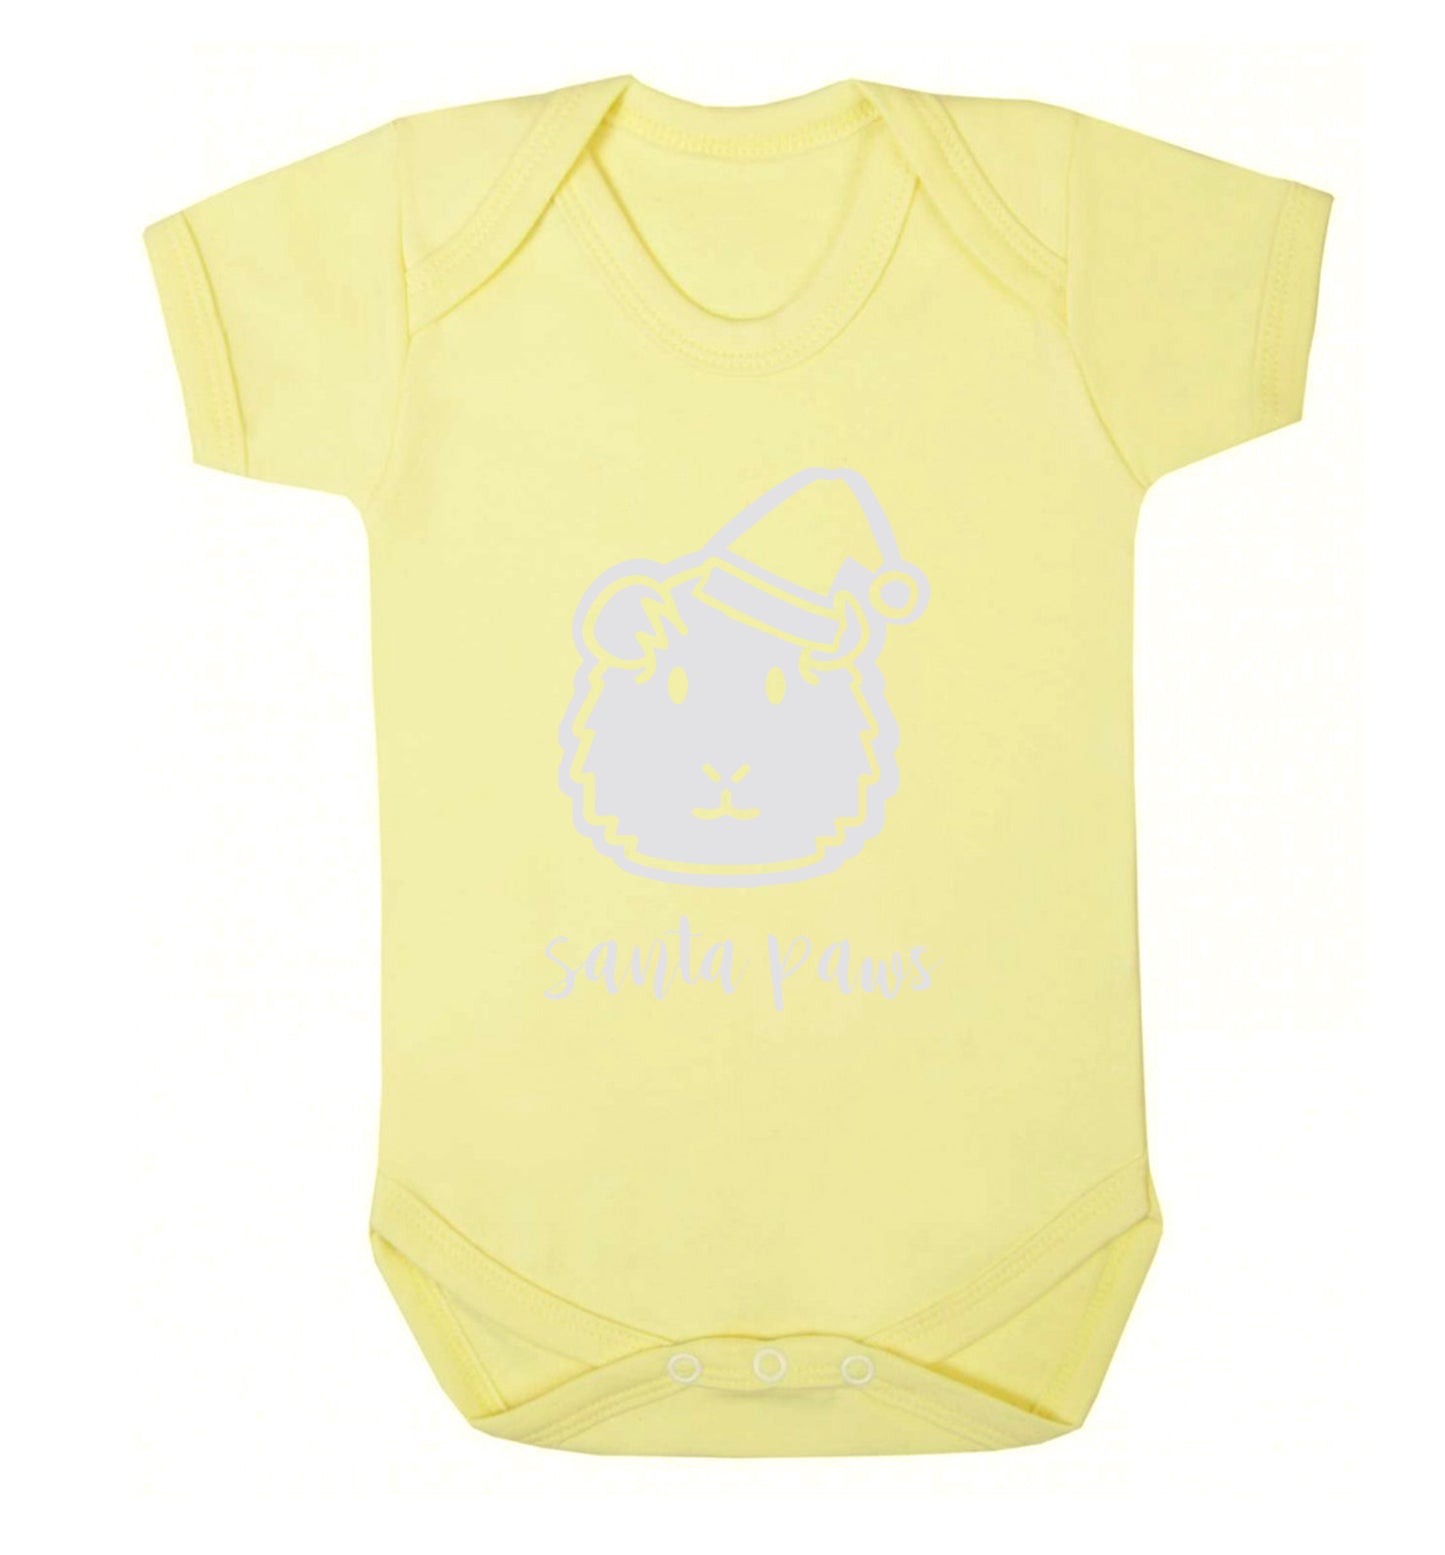 Guinea pig Santa Paws Baby Vest pale yellow 18-24 months